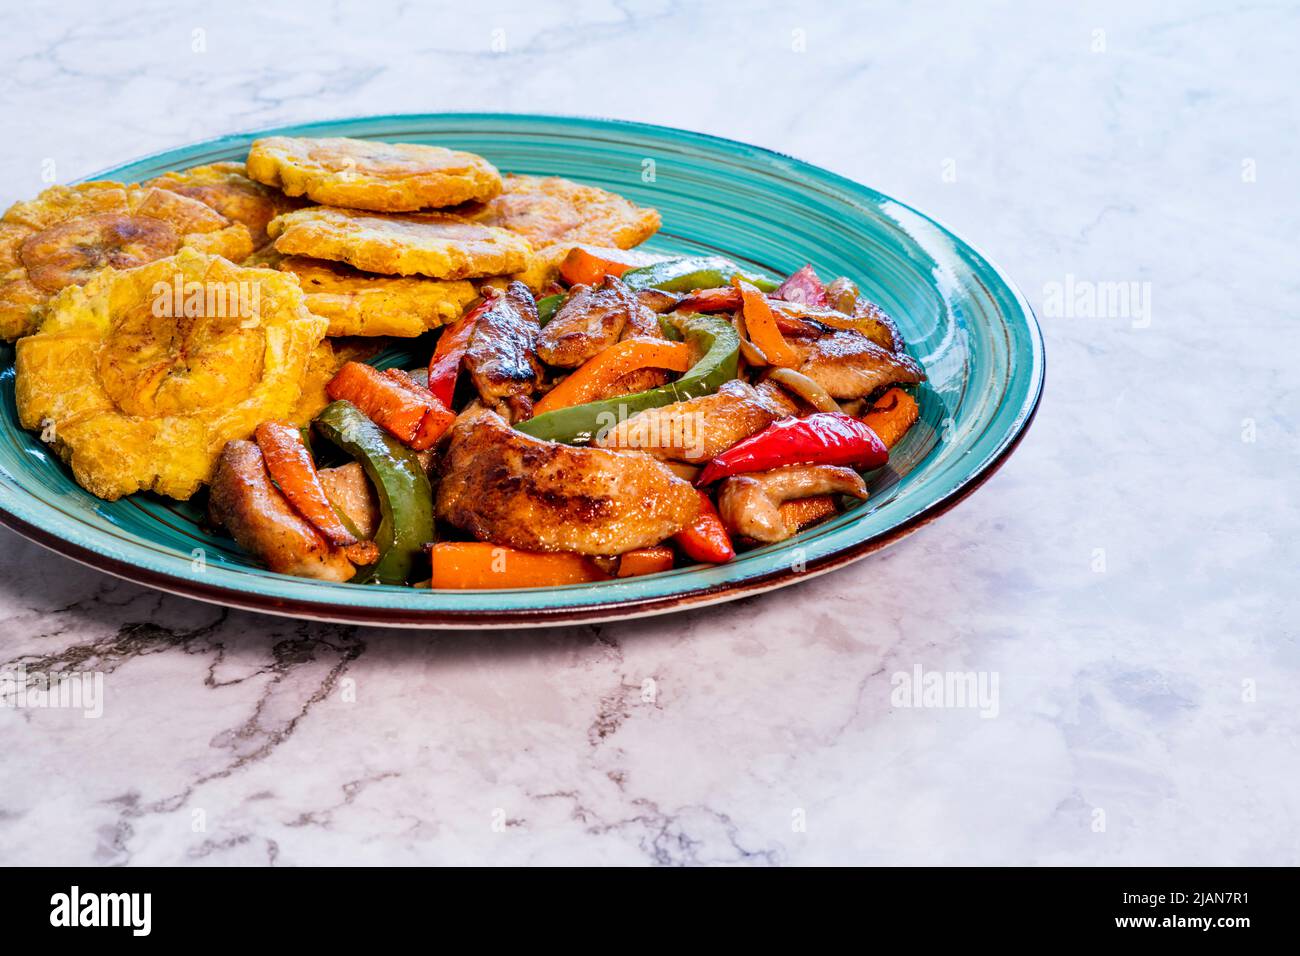 Chopped steak or Bistec Picao and patacones or tostones are fried green plantain slices, made with green plantains, Typical latin food, Panamá Stock Photo